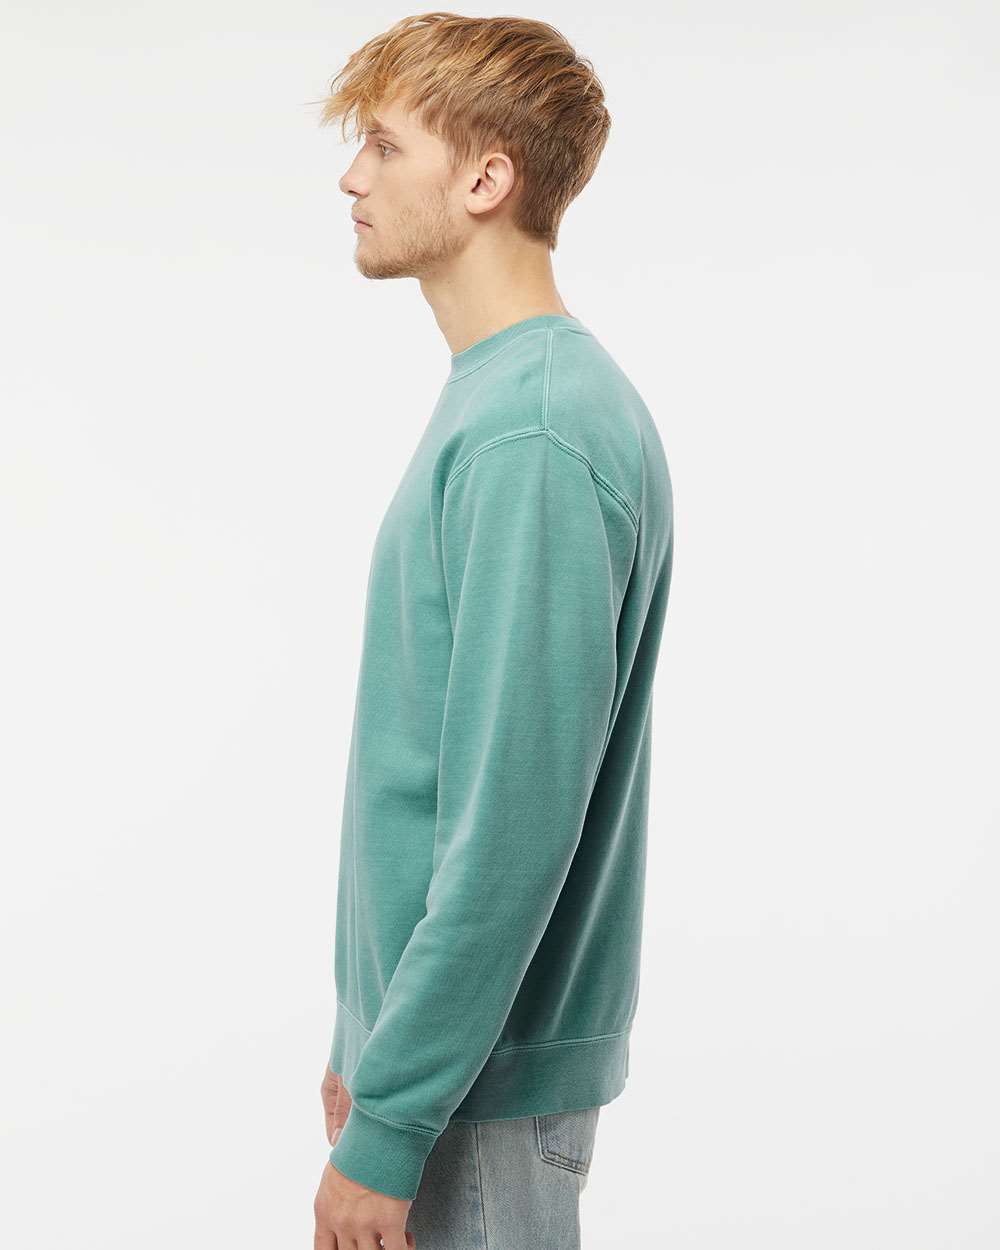 Independent Trading Co. Unisex Midweight Pigment-Dyed Crewneck Sweatshirt PRM3500 #colormdl_Pigment Mint